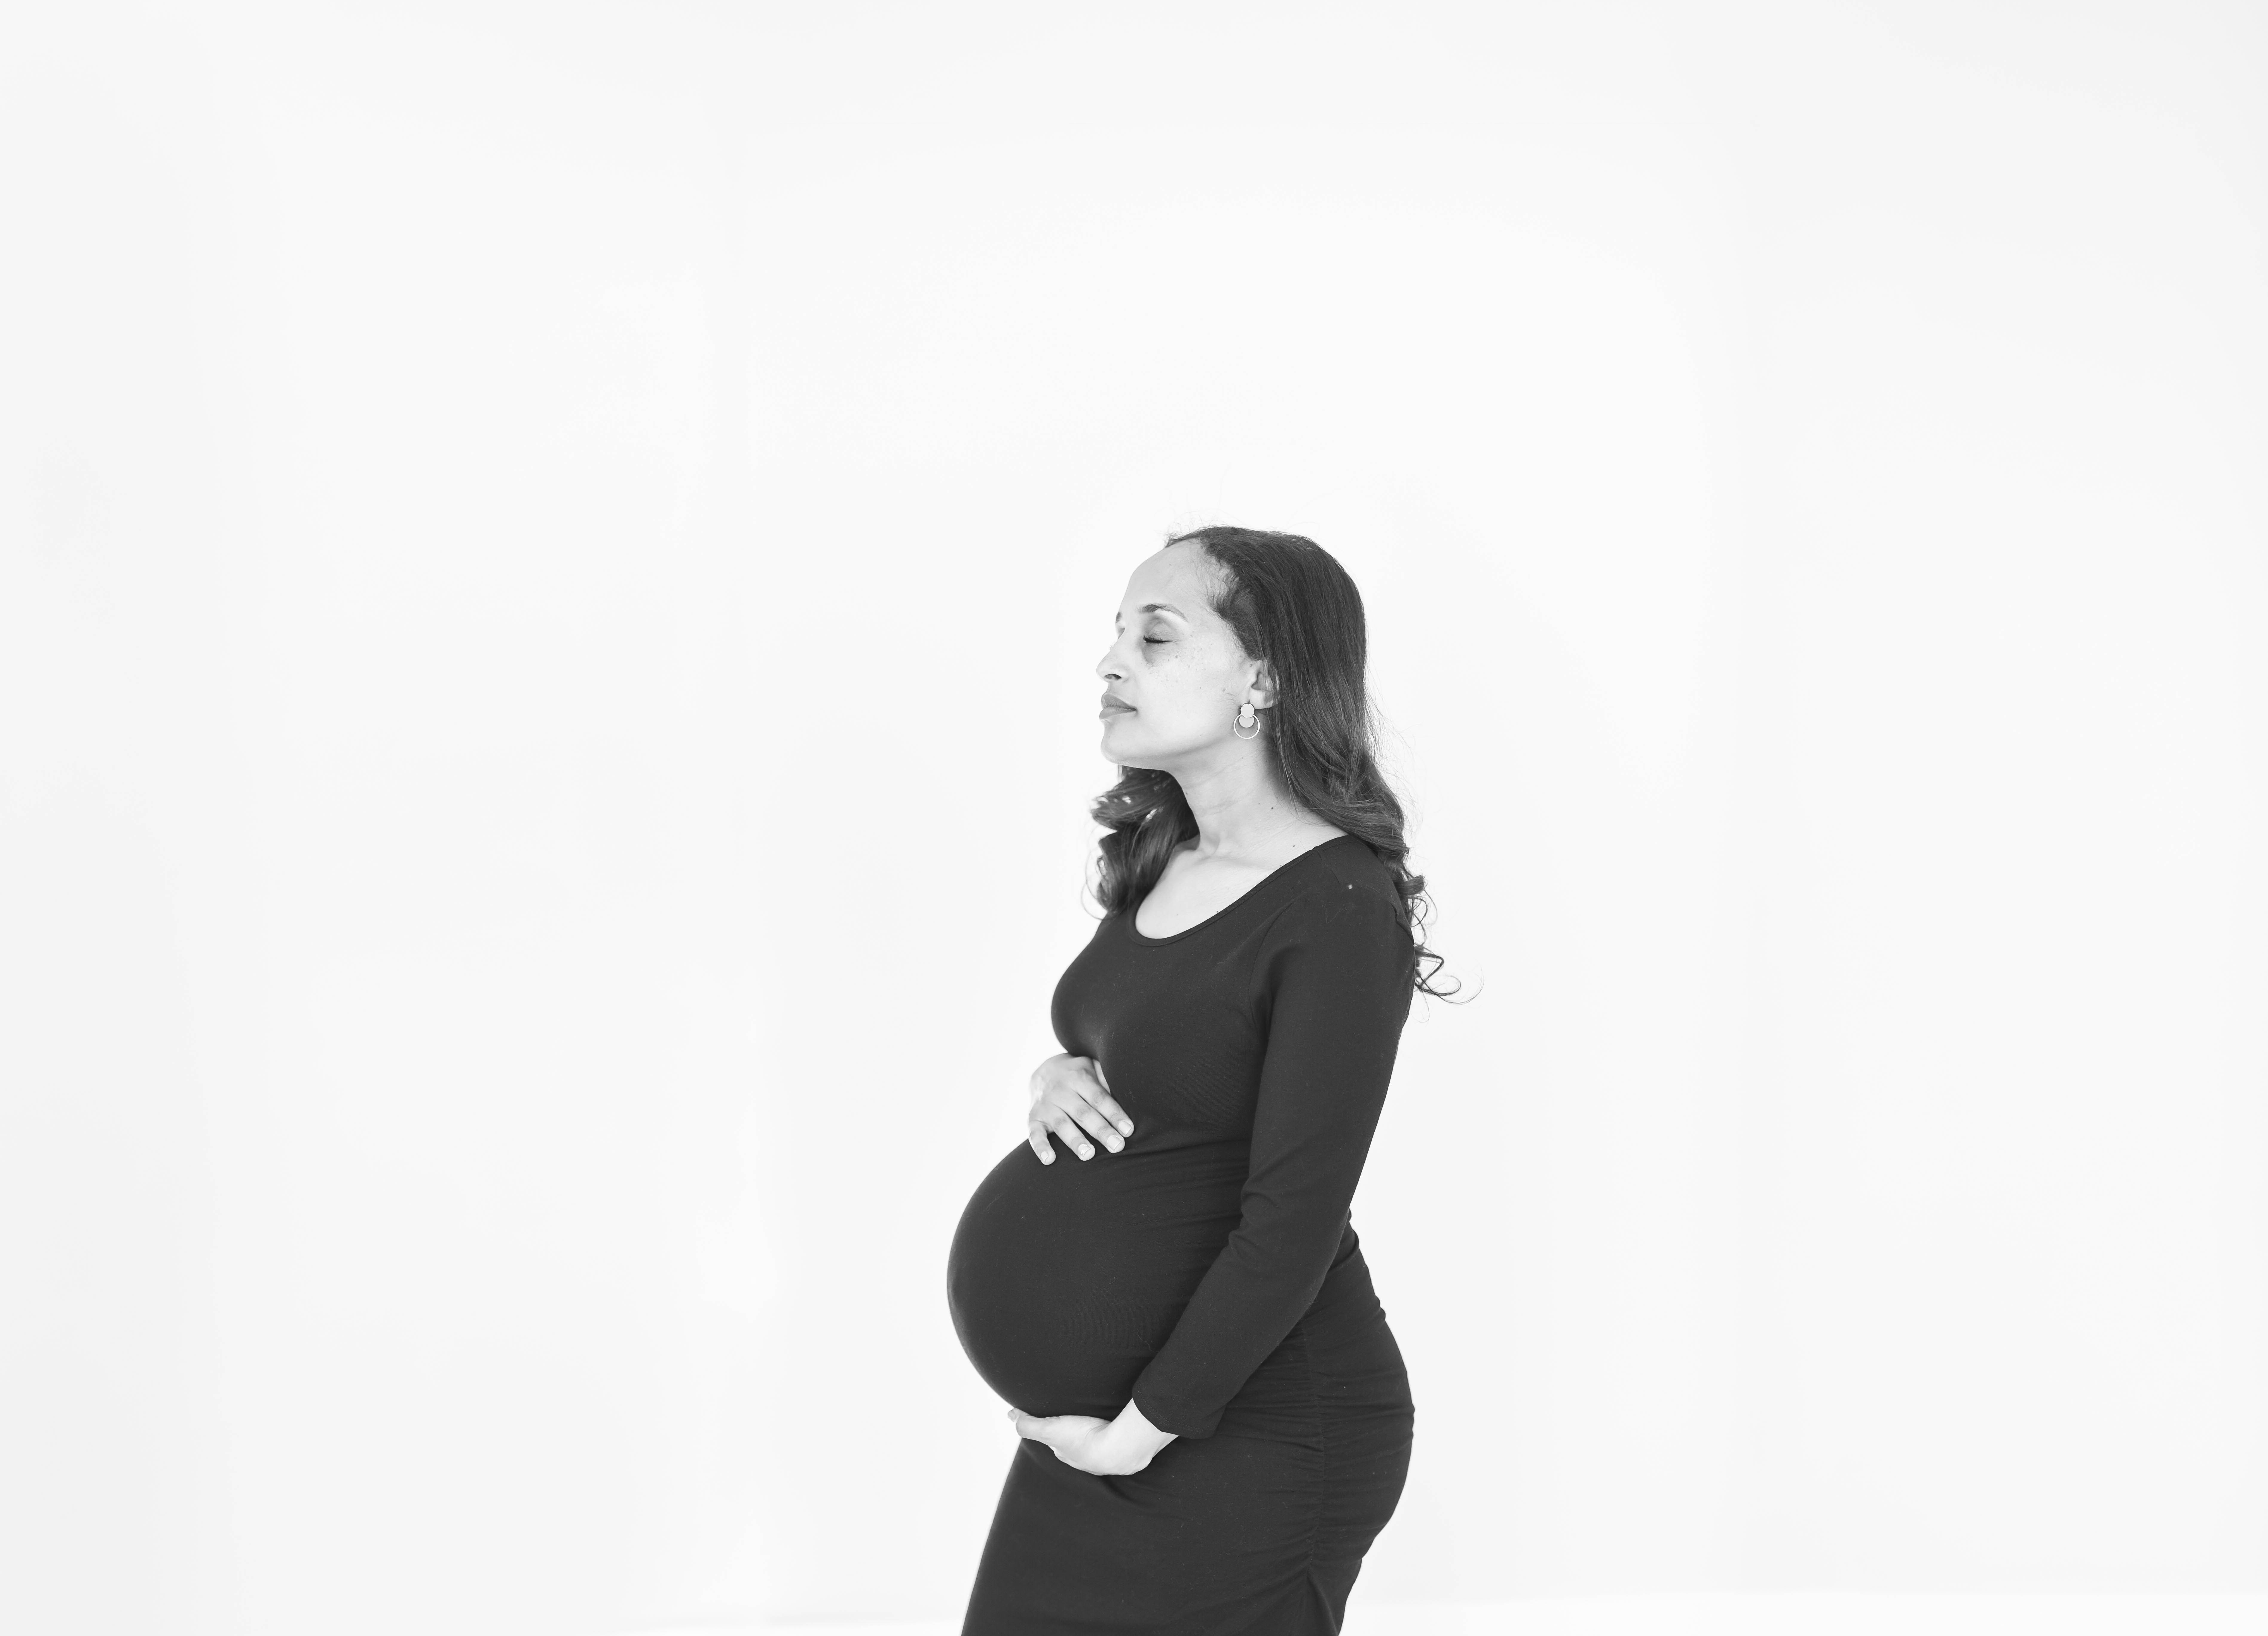 denver maternity photographer- a pregnant women stands next to a white wall